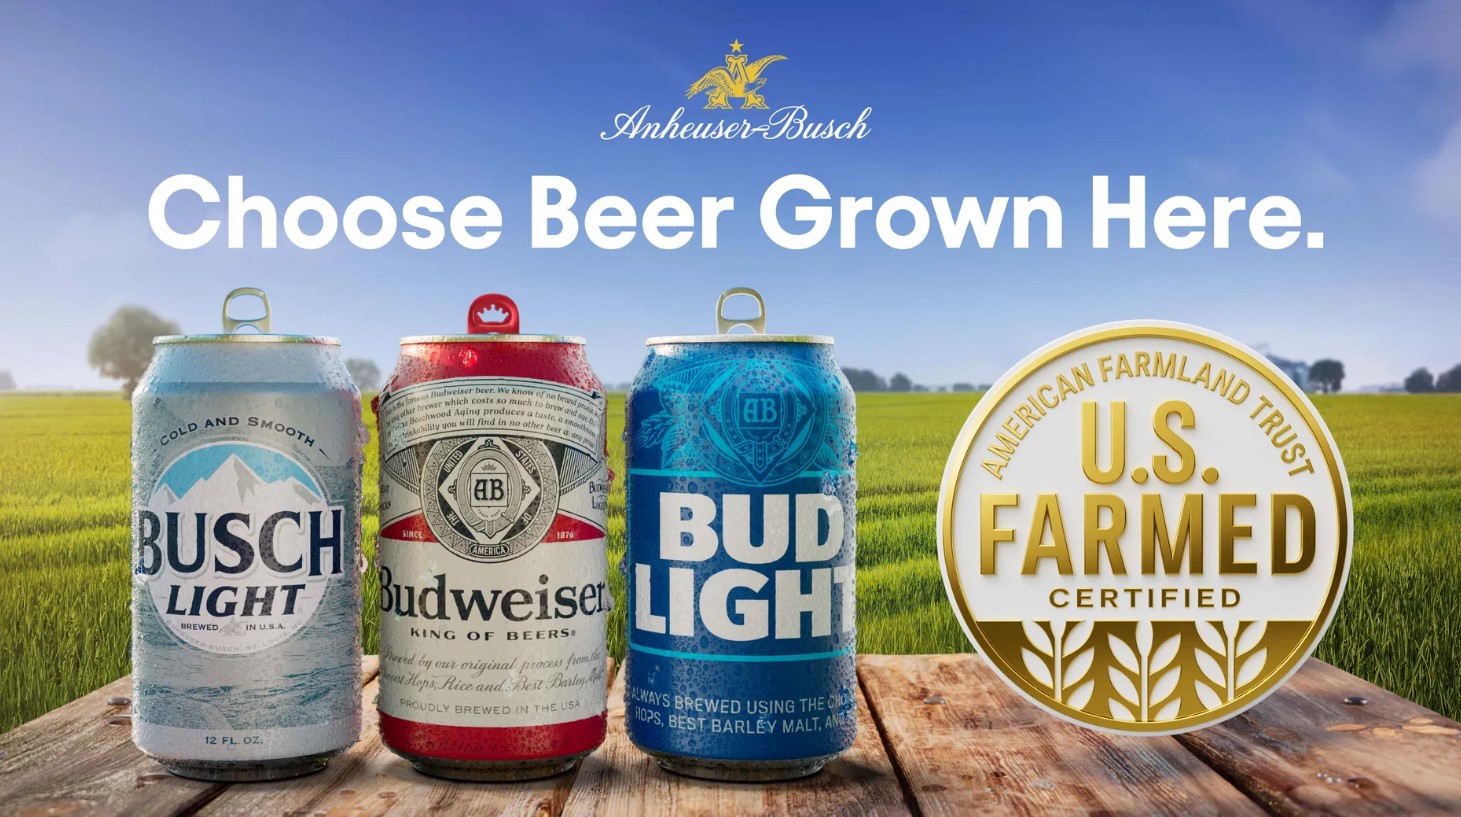 AB Choose Beer Grown Here graphic shows three beers in a line up plus US Farmed Certified logo on table in front of green rice field